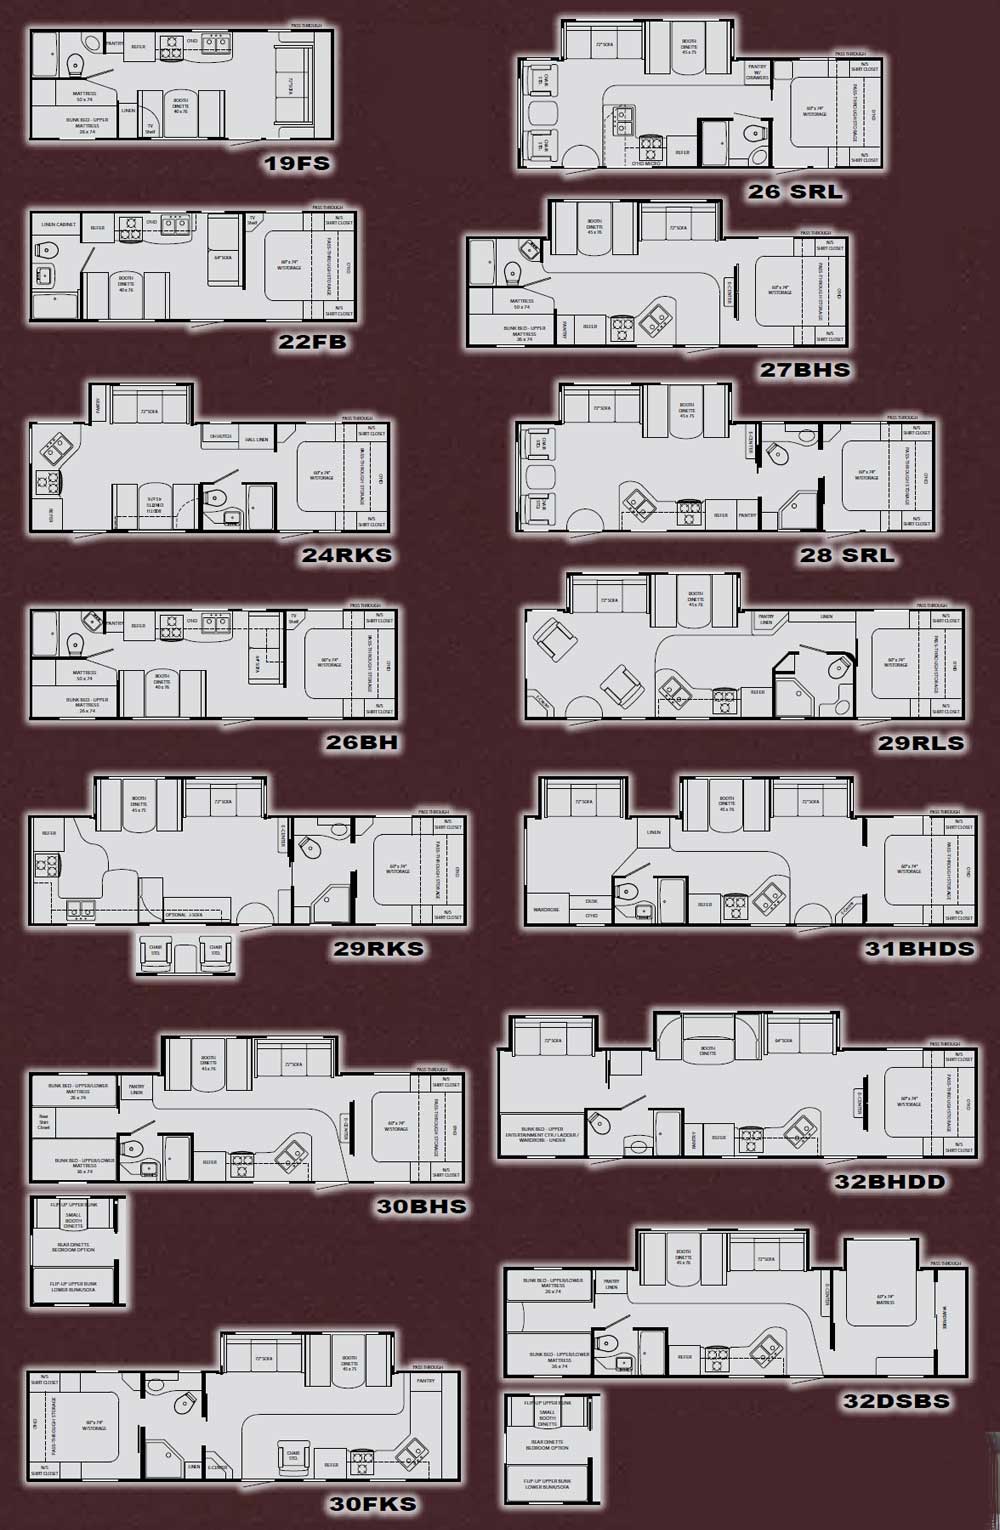 Heartland North Country travel trailer floorplans large